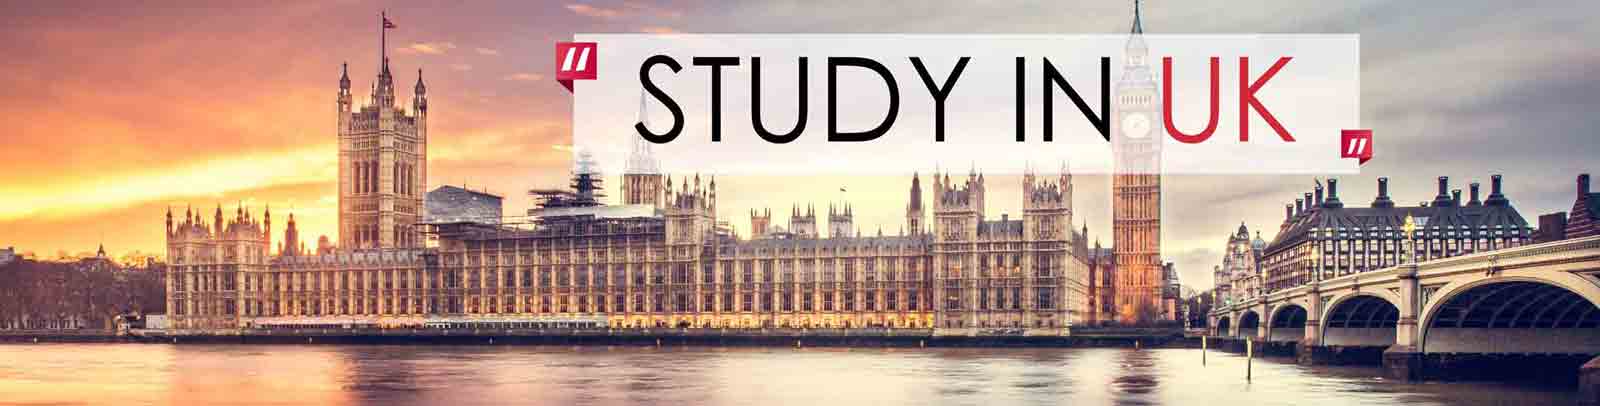 Top 11 Reasons to Study in UK